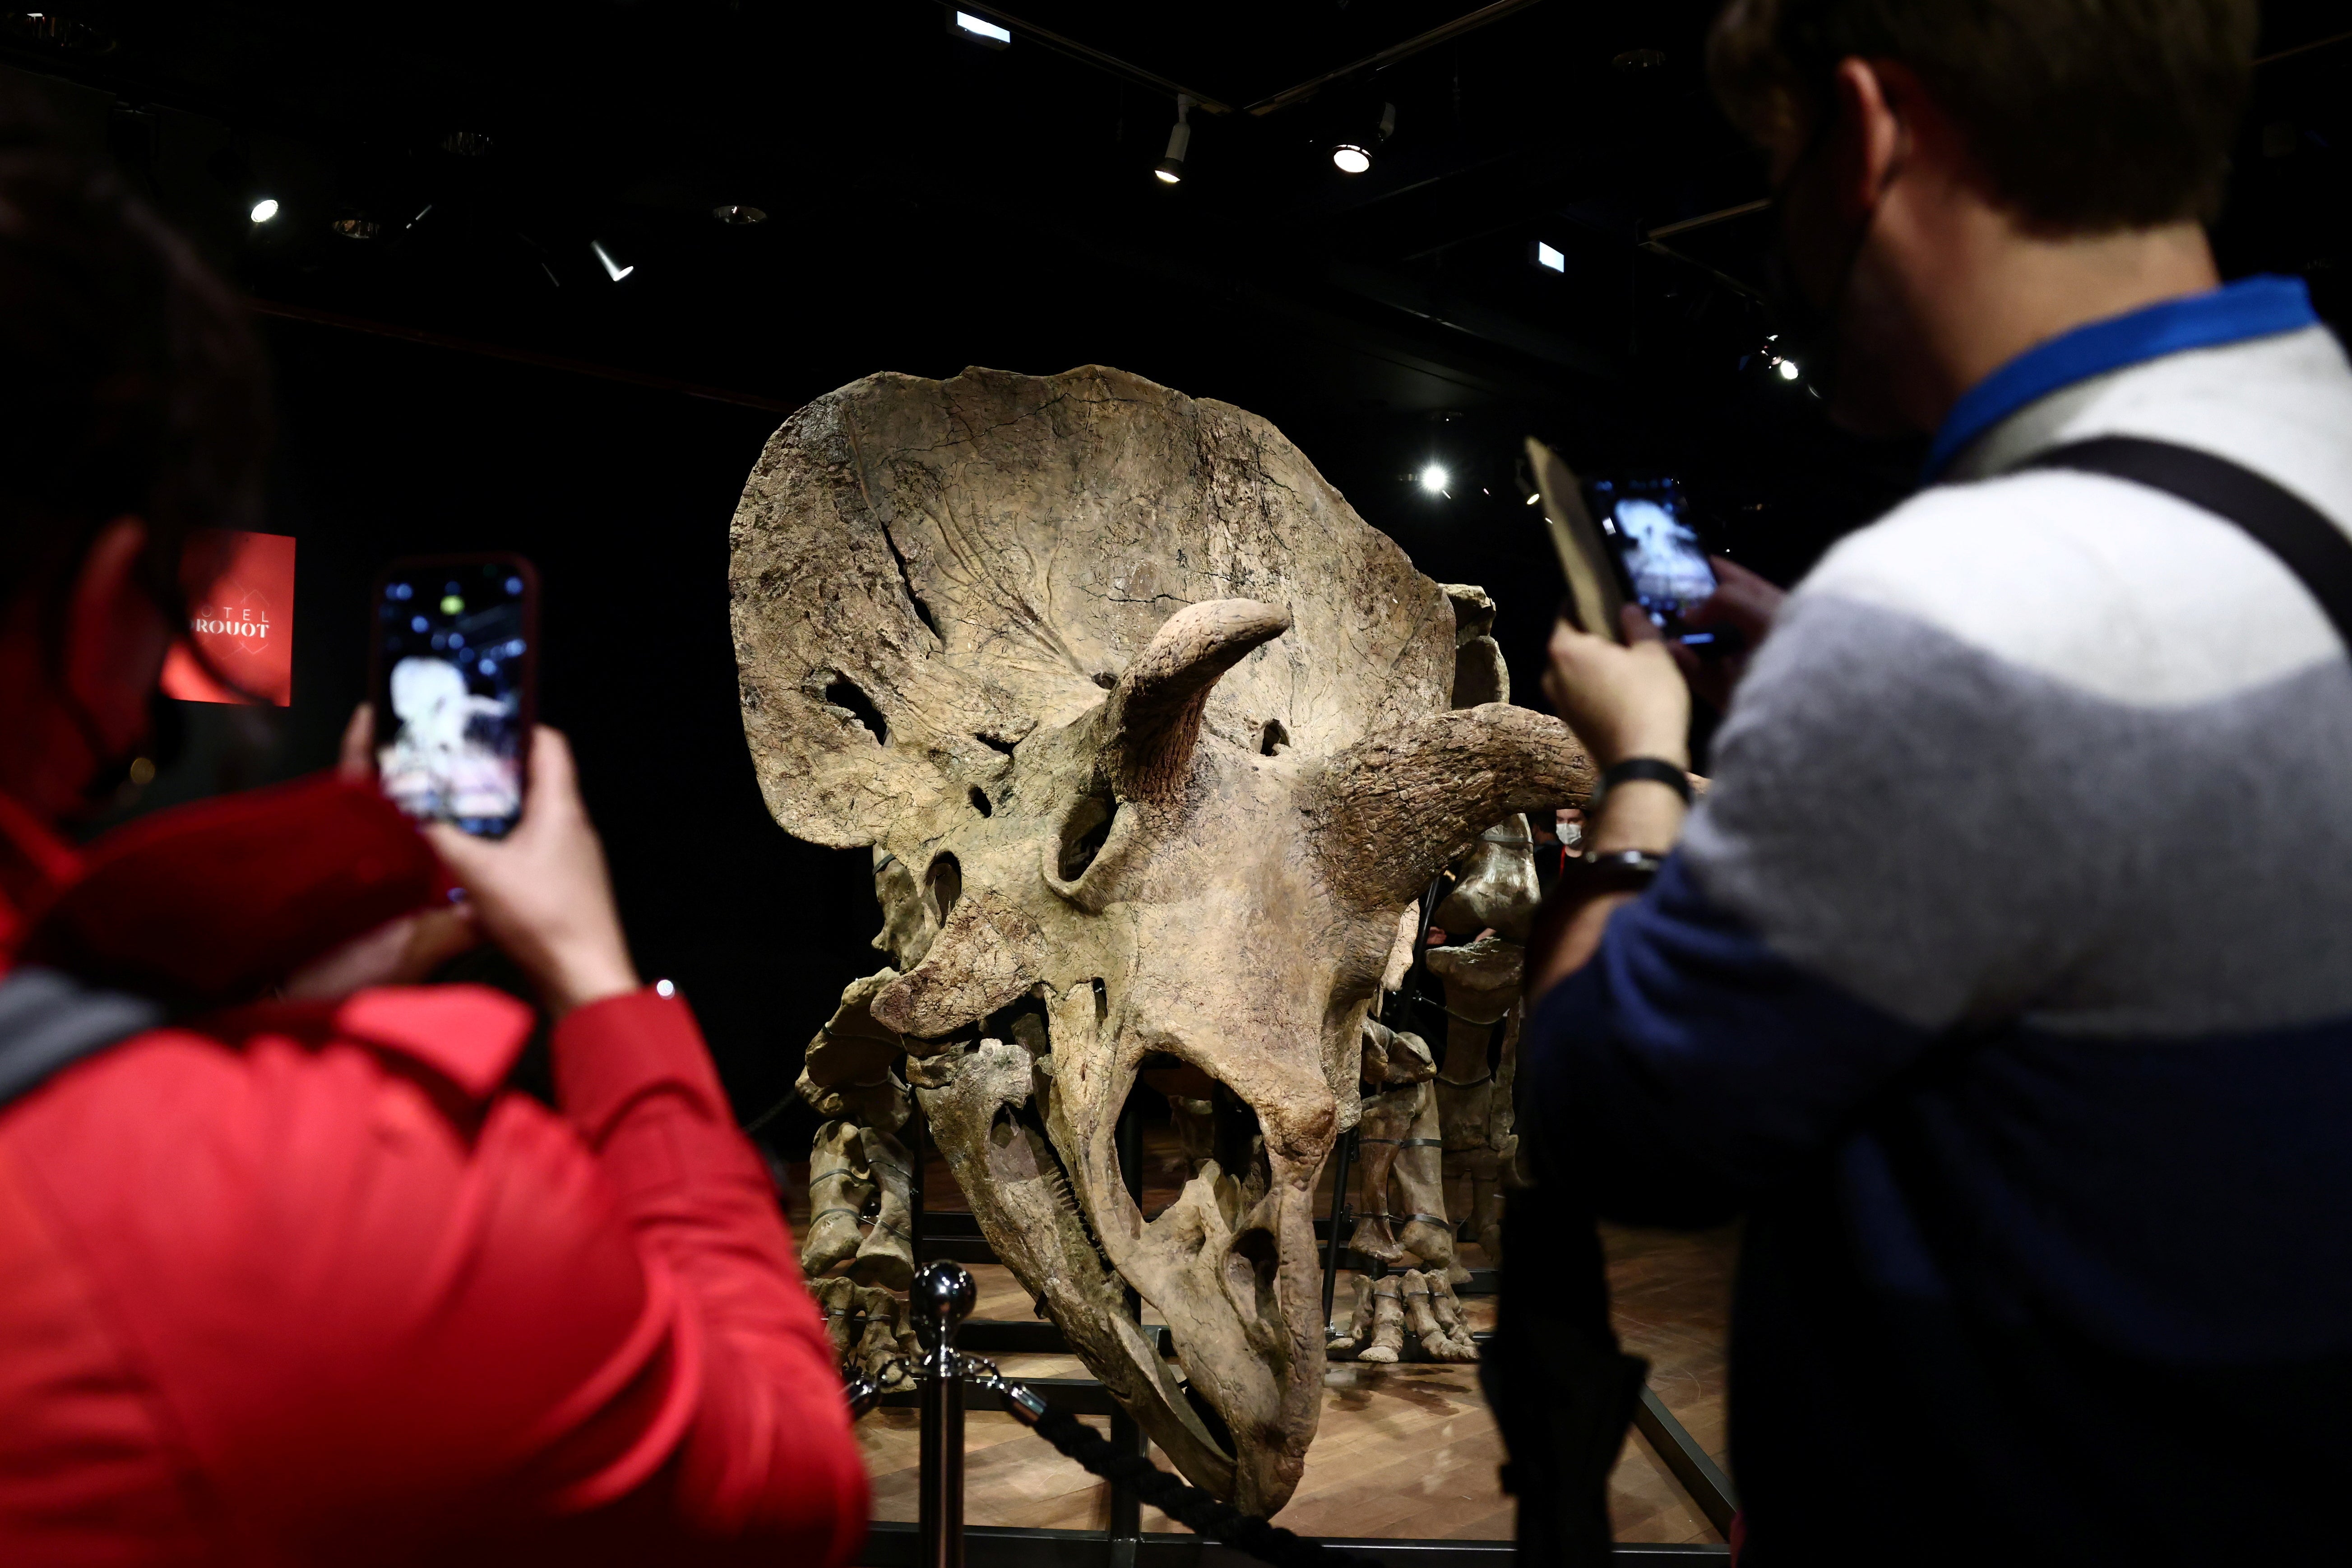 The skeleton of ‘Big John’, a gigantic Triceratops, sold for an incredible $7.7 million (£5.5m)